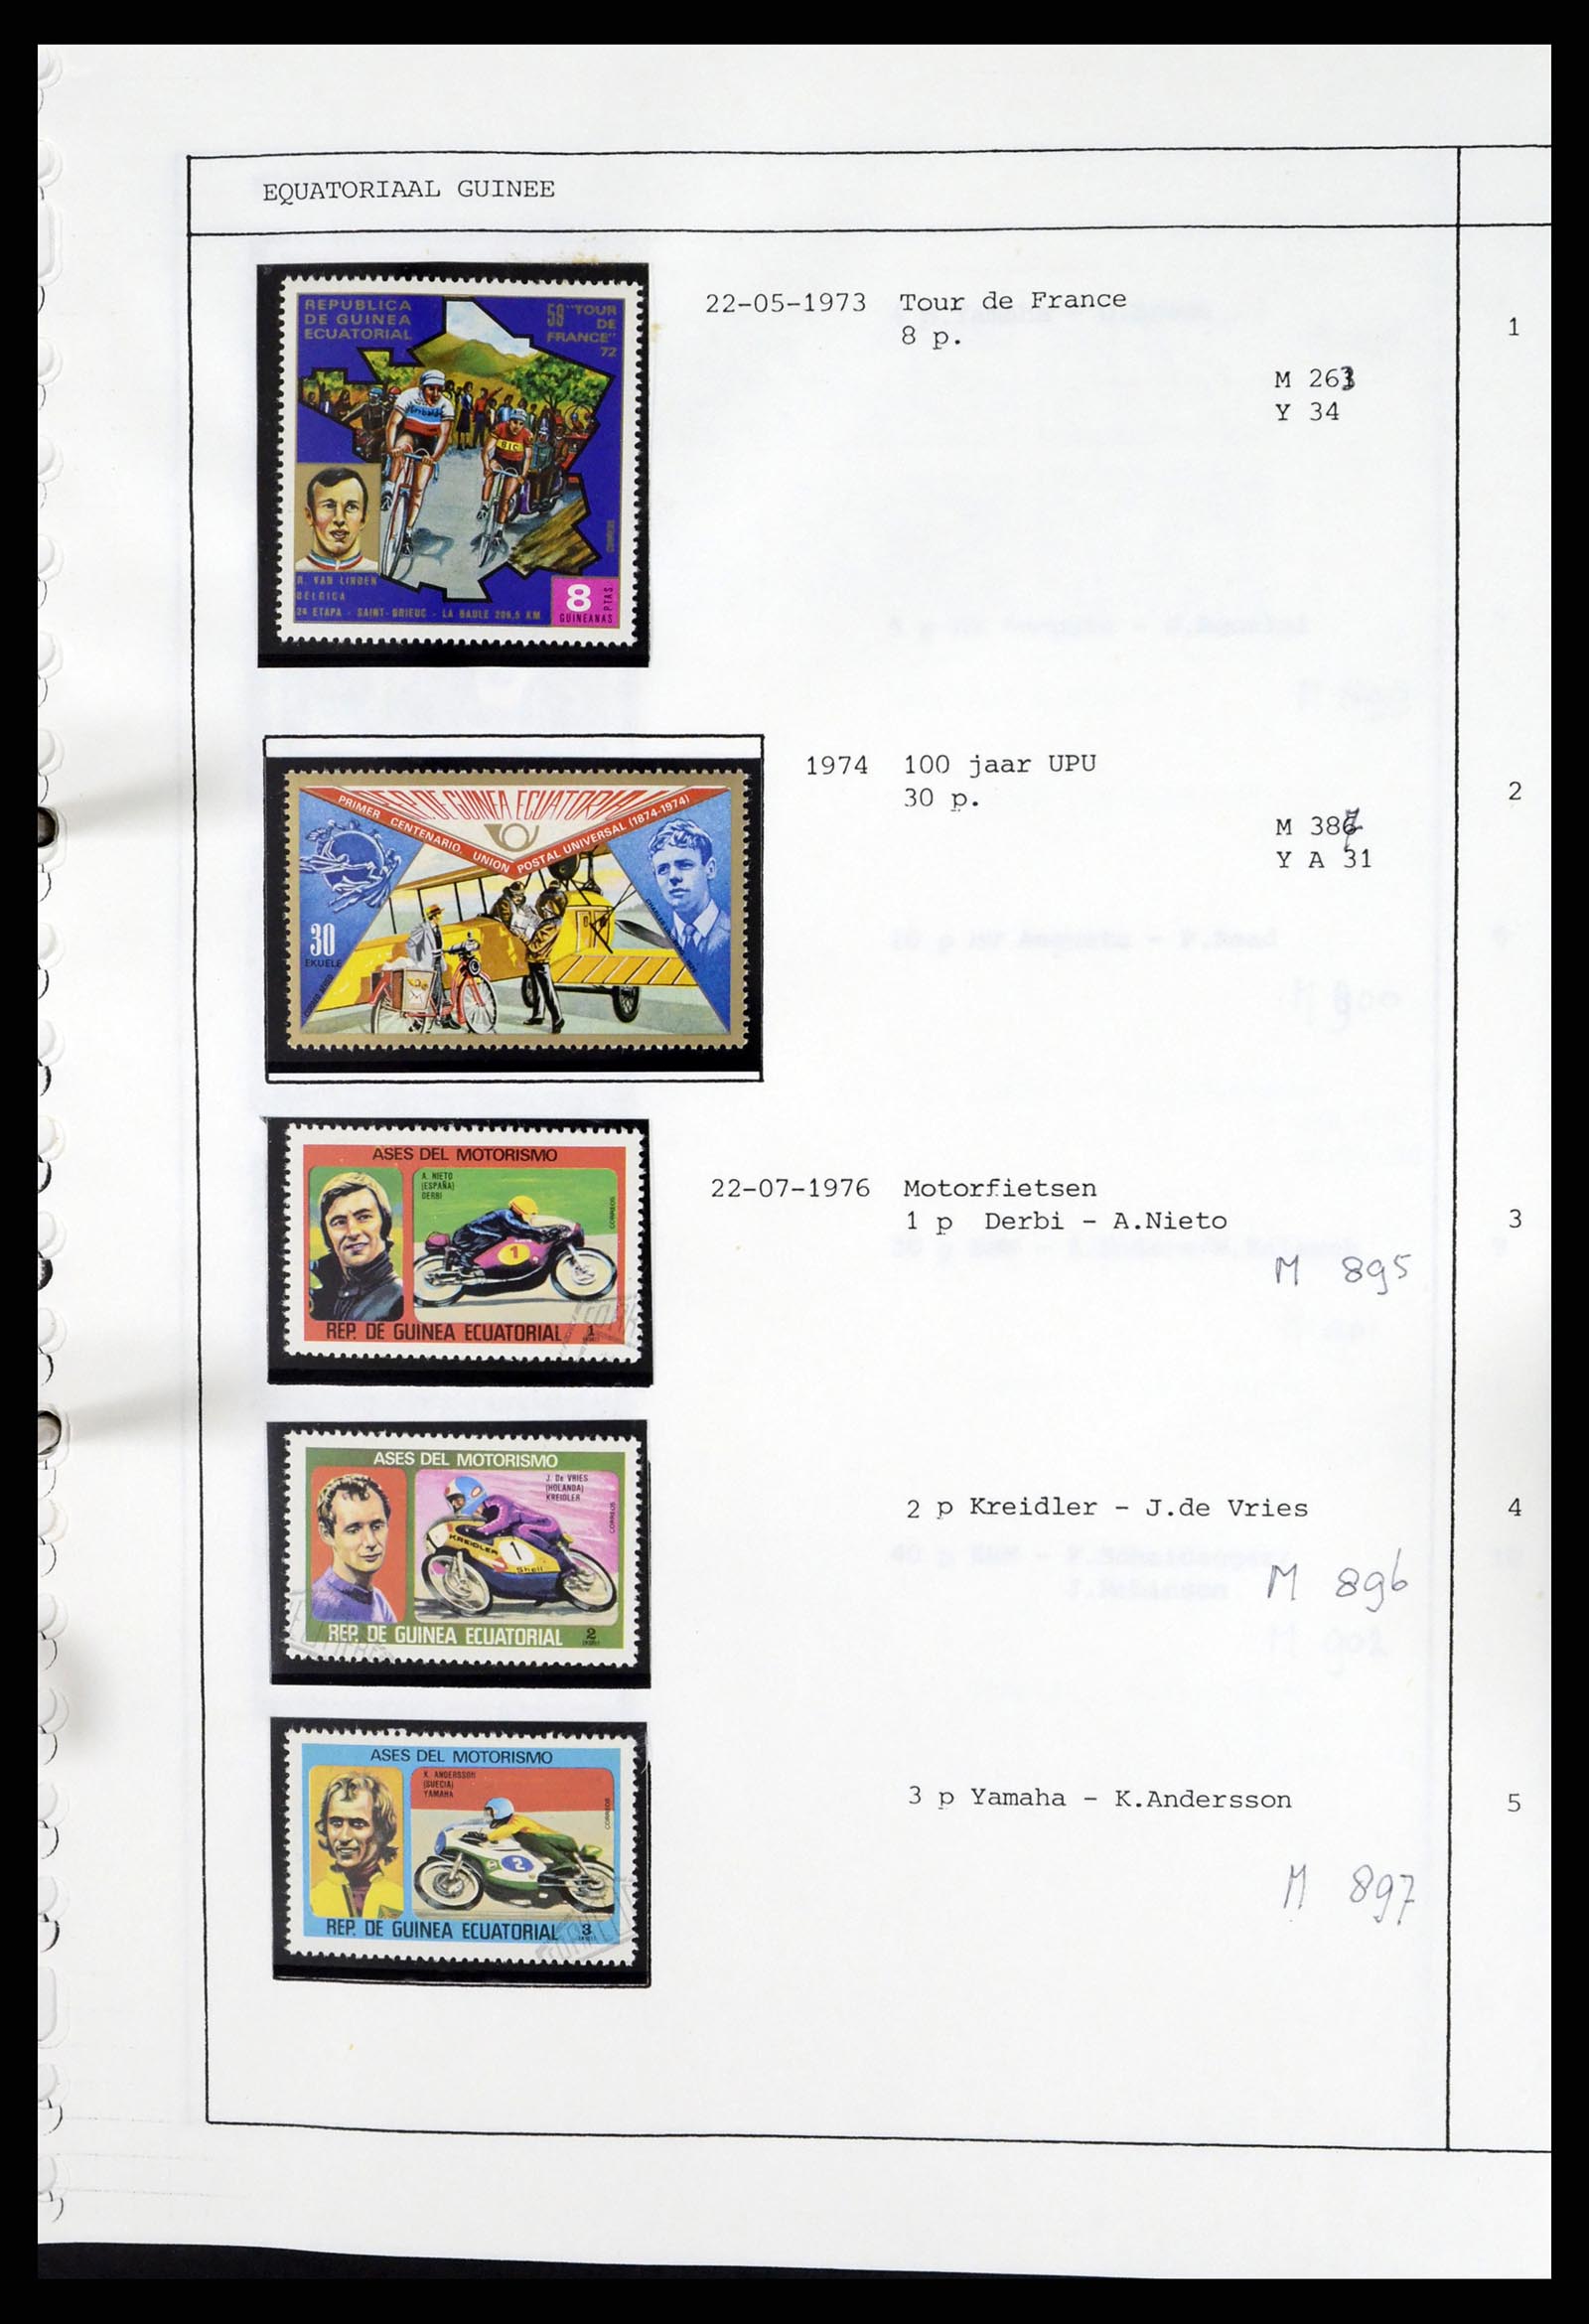 37462 072 - Stamp collection 37462 Thematics Motorcycles 1922-2000.